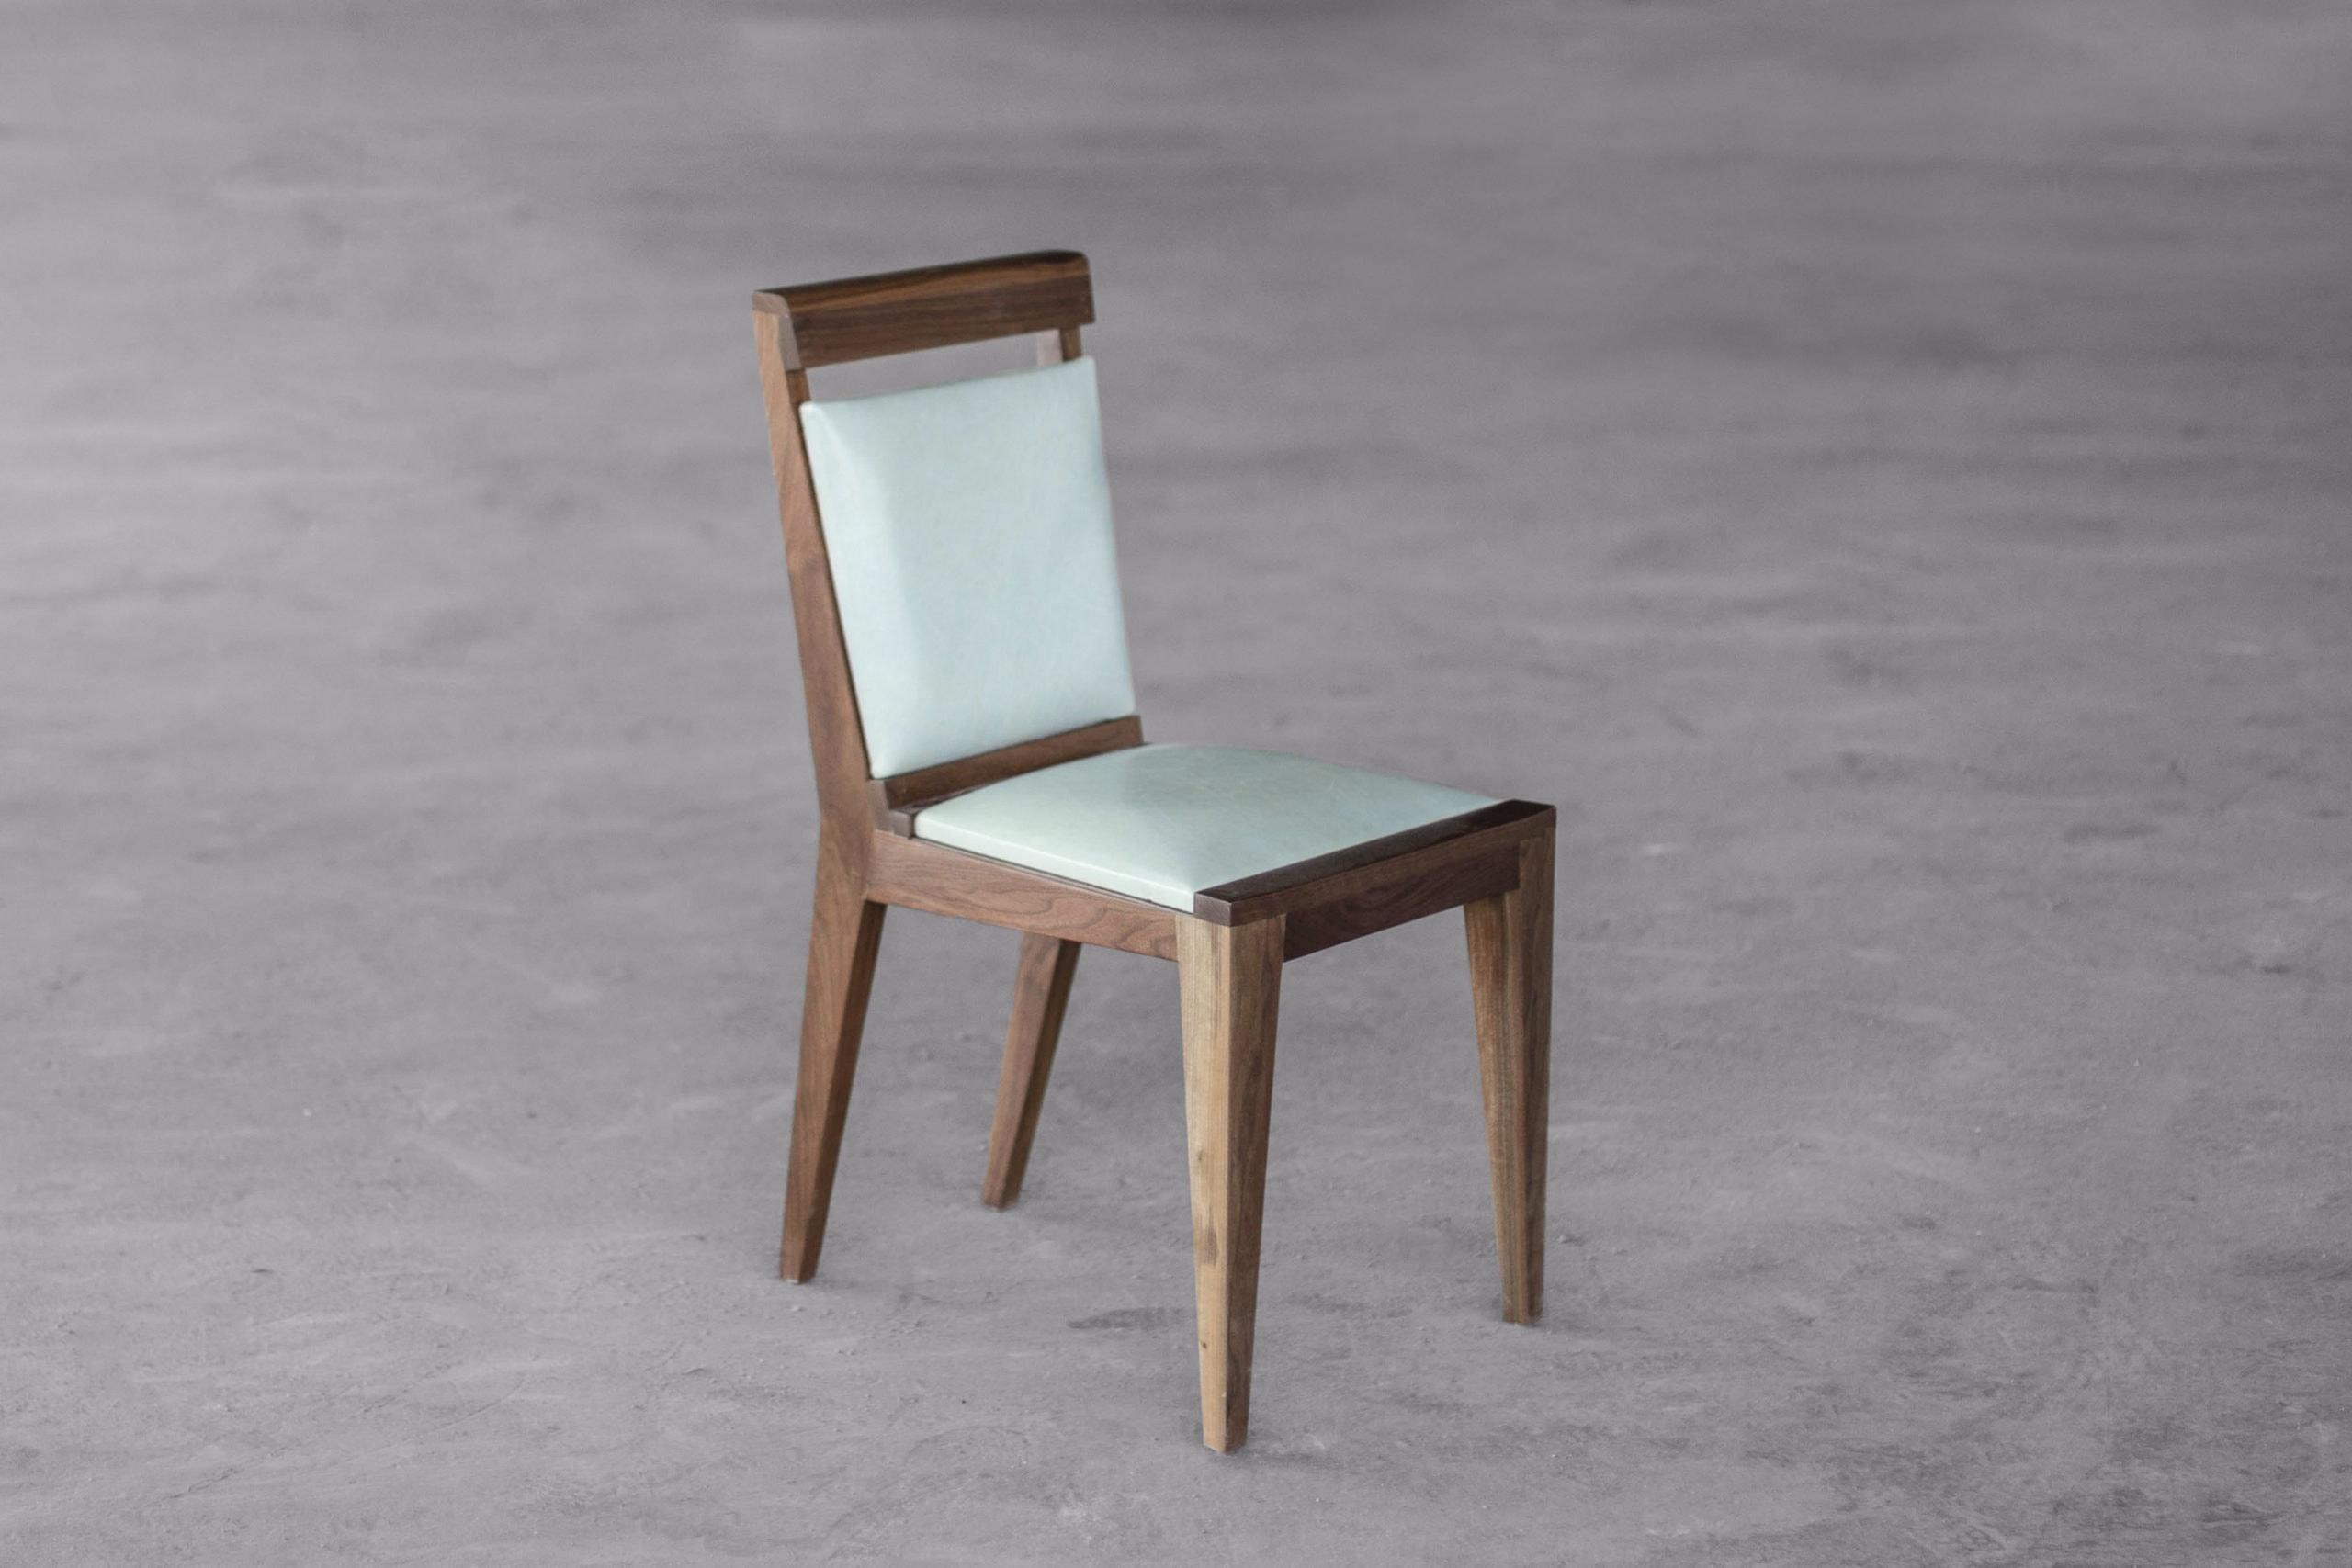 SENTIENT contemporary designed Angles dining chair in walnut with custom turquoise color leather upholstery on a concrete floor